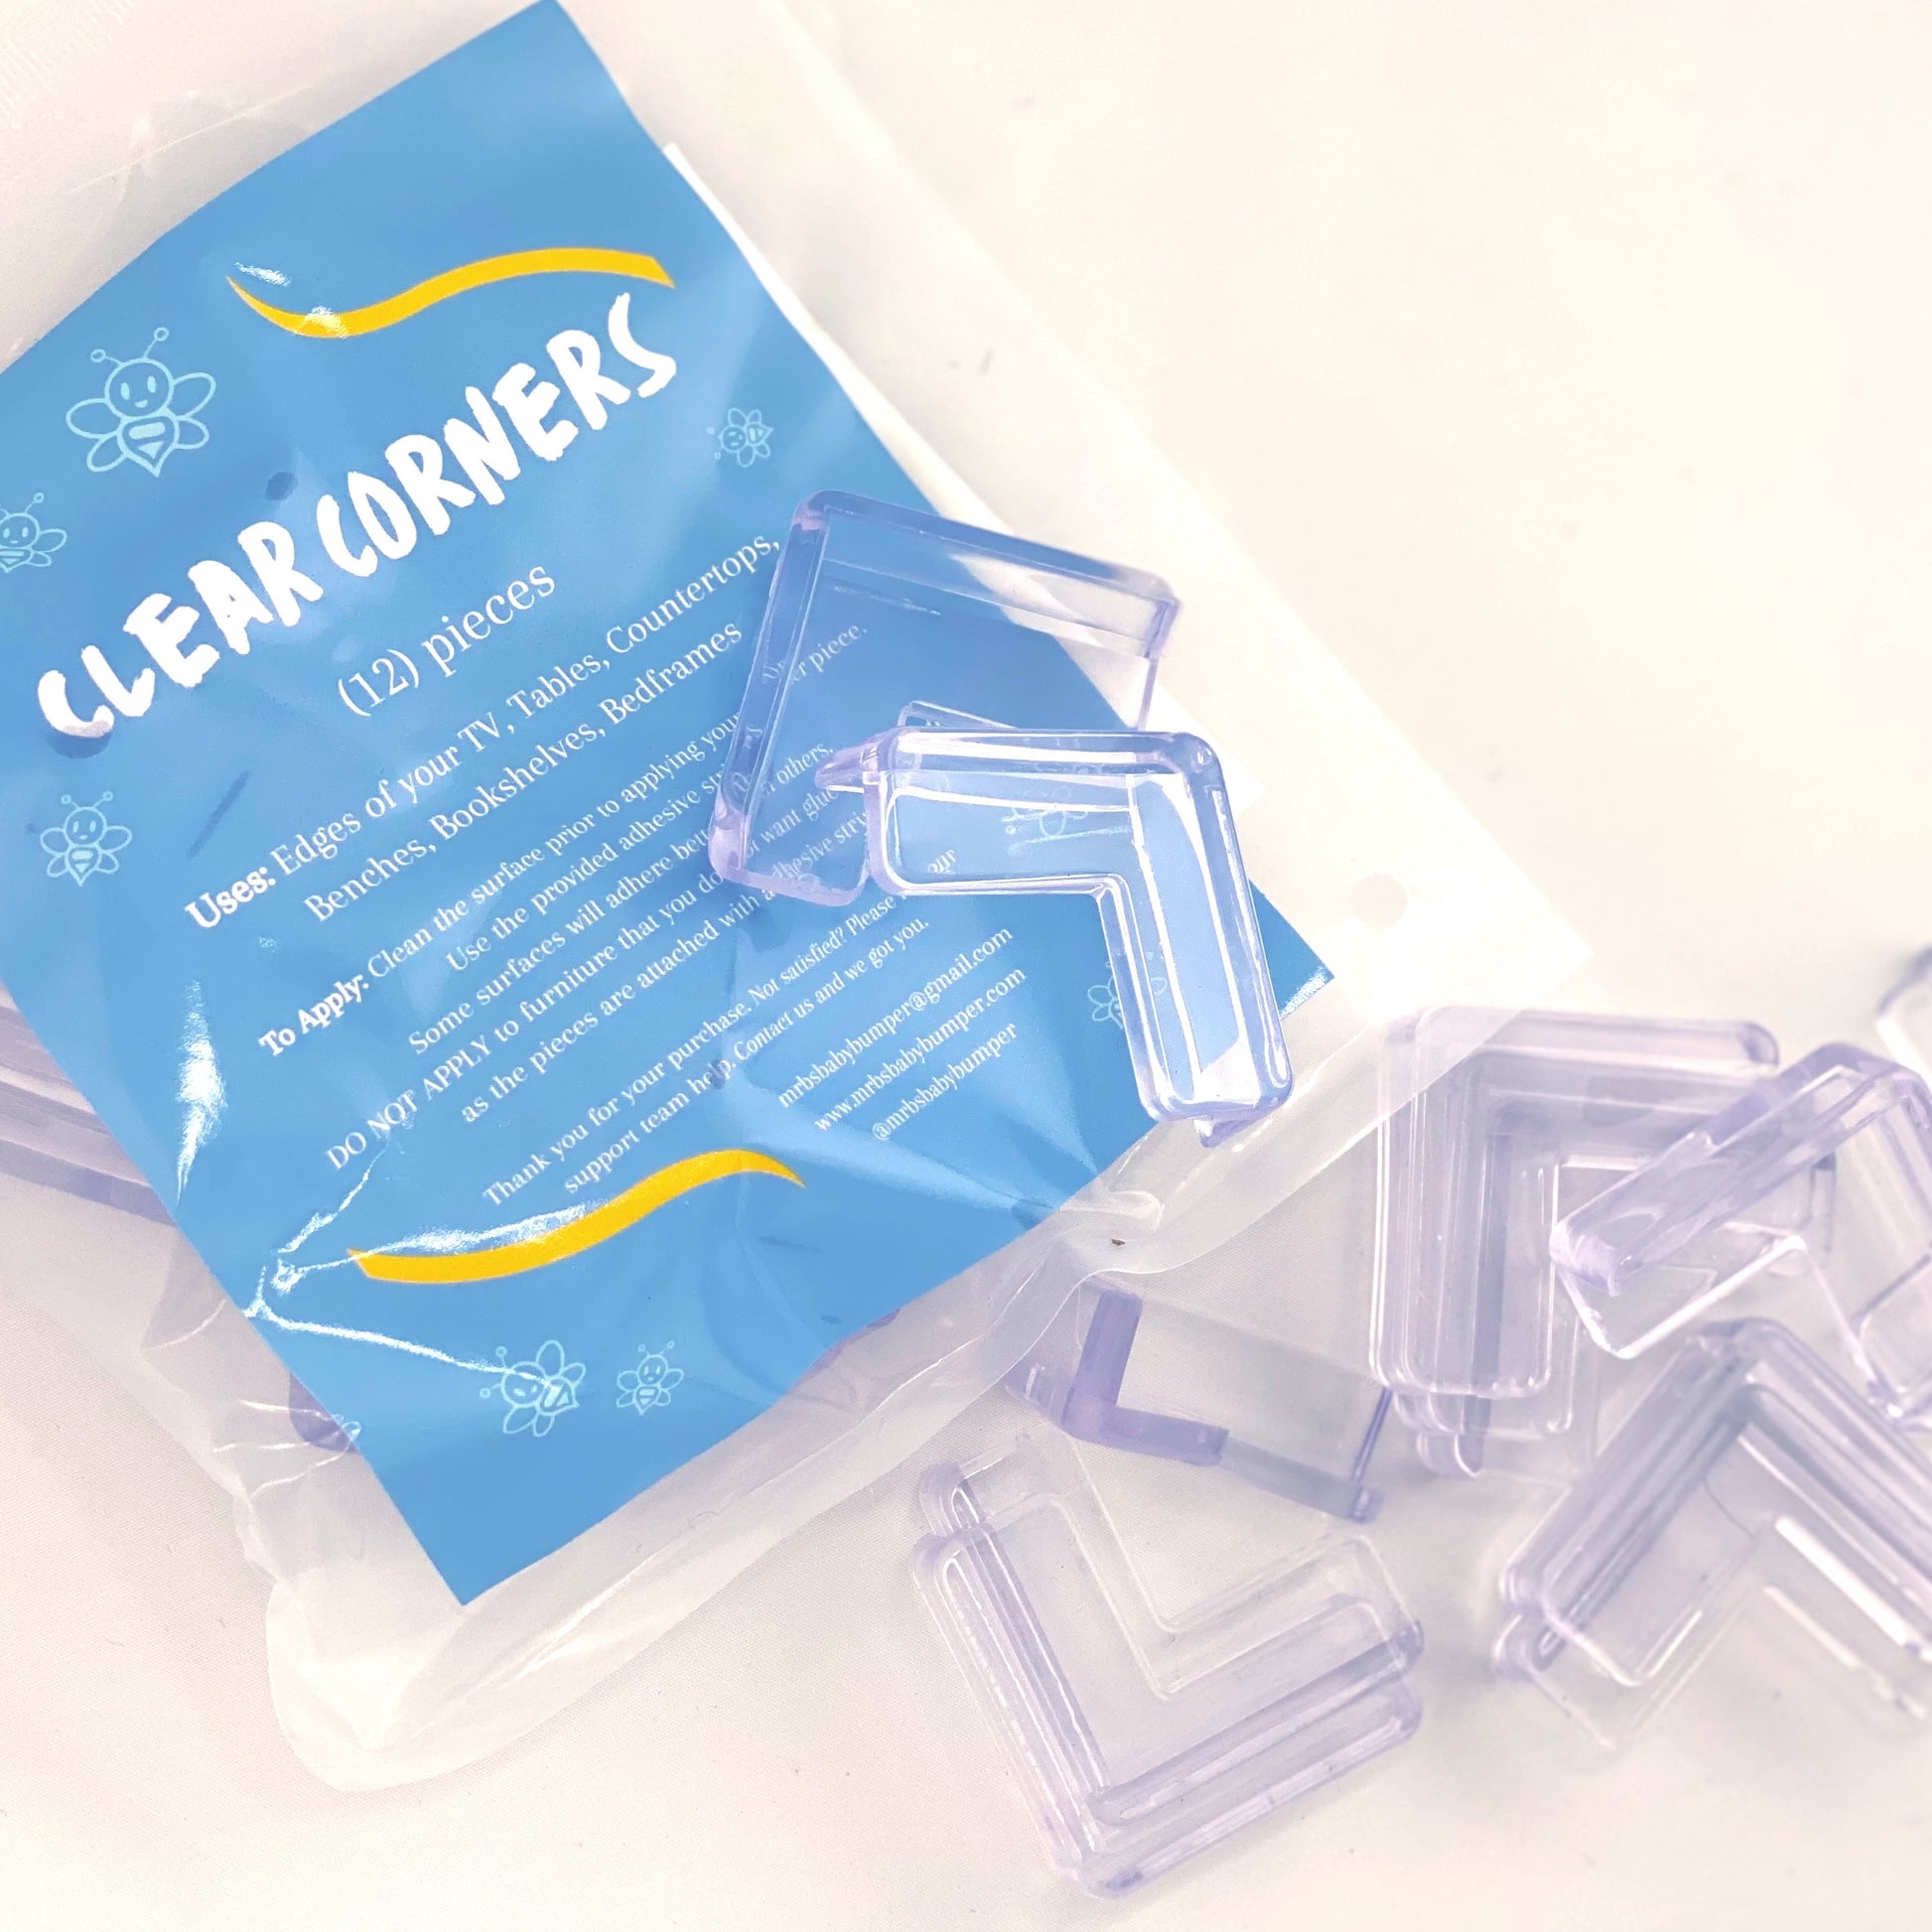 Clear L shaped corner guards to protect you from hurting yourself on the edges of countertops, TVs, glass tables, bookshelves. Get twelve clear corners including adhesive in one bag. 